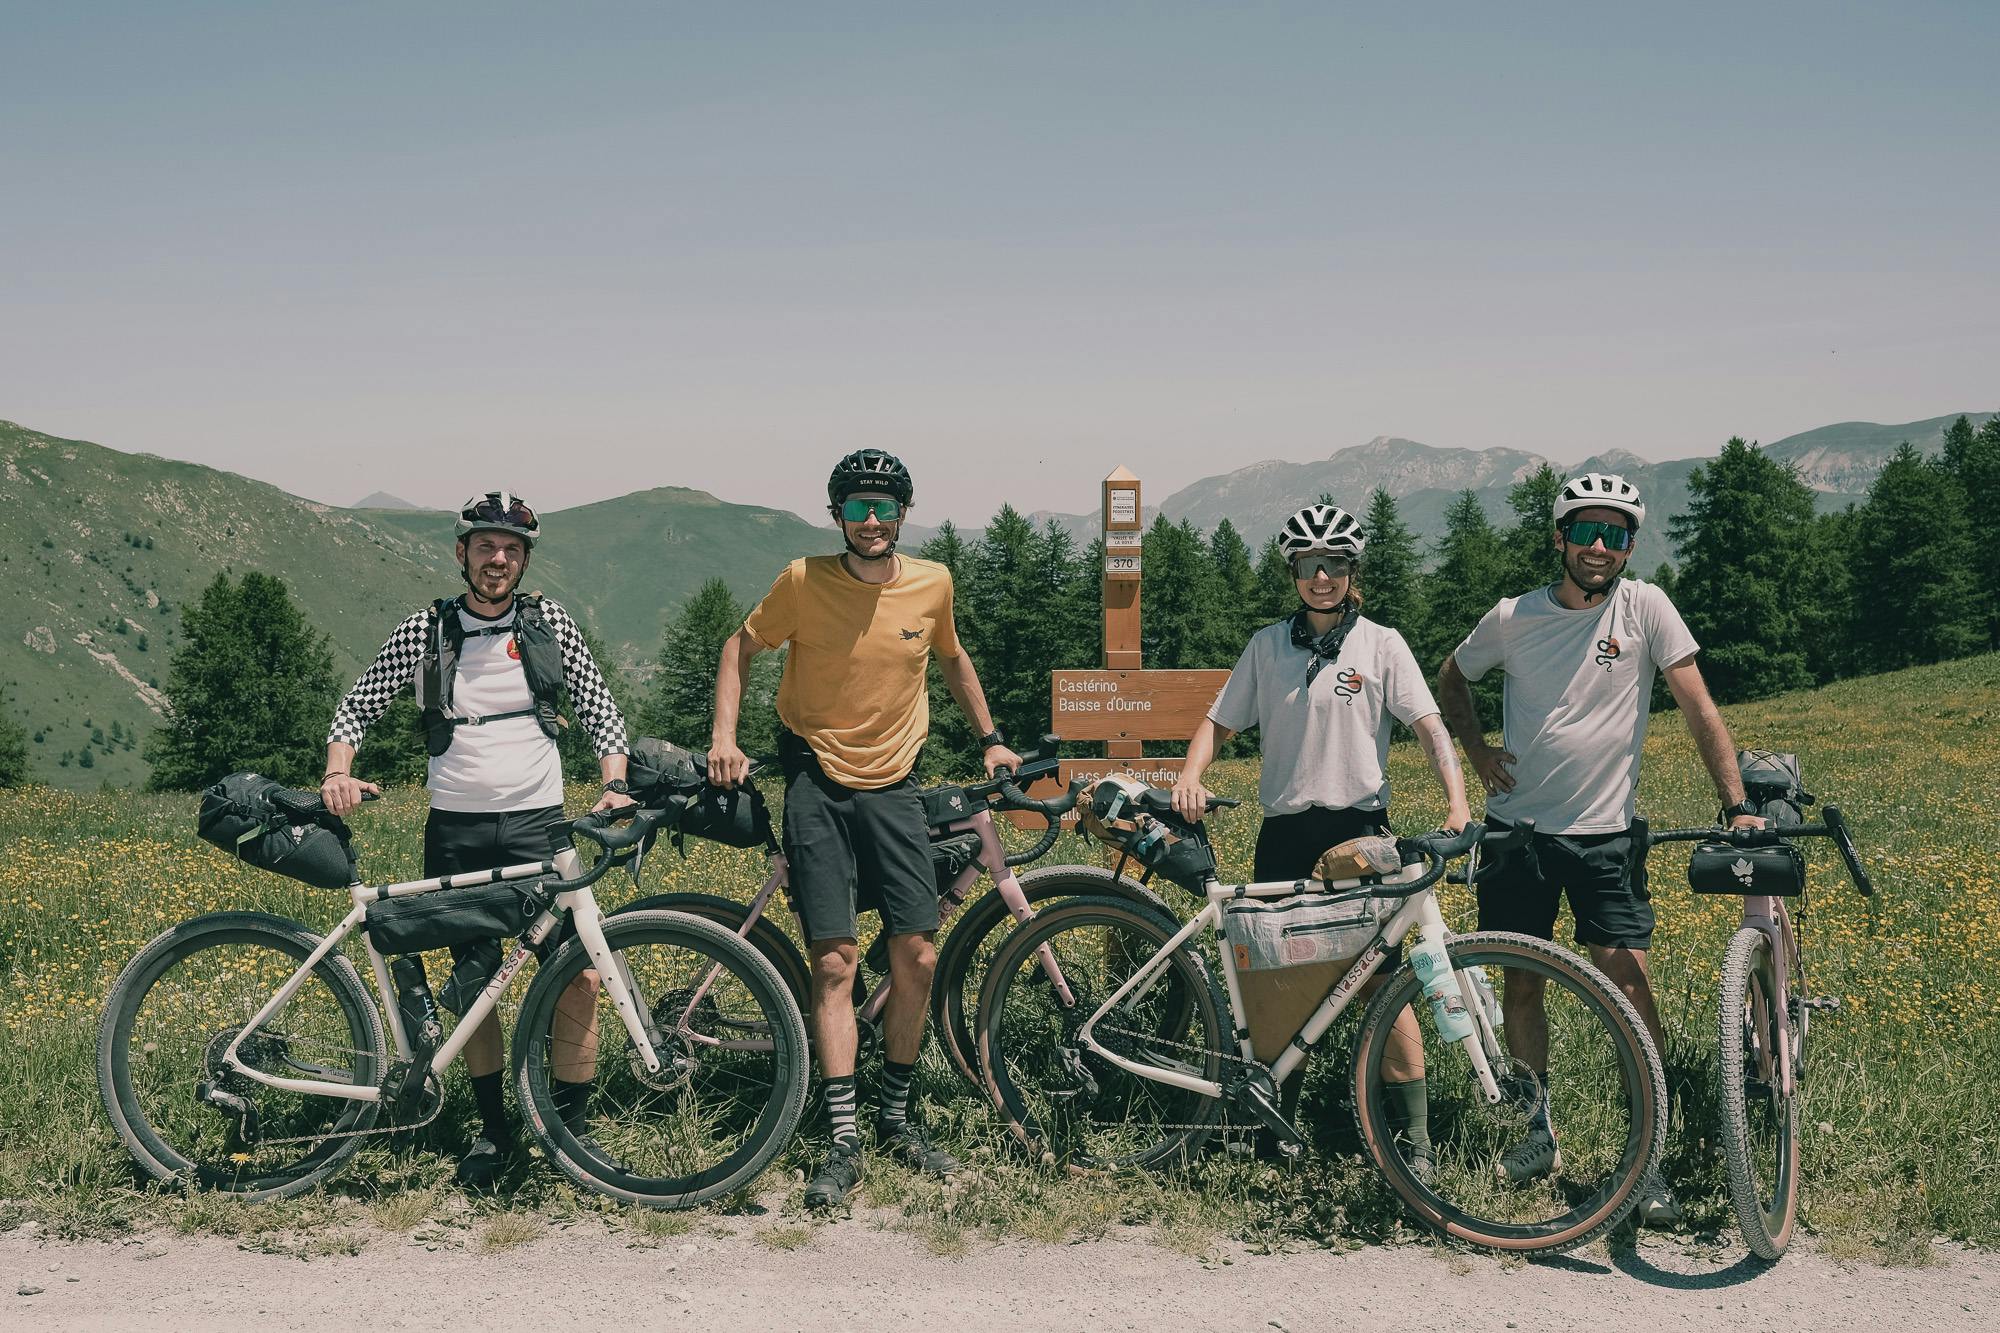 A group of people on a gravel ride pose for a photo.